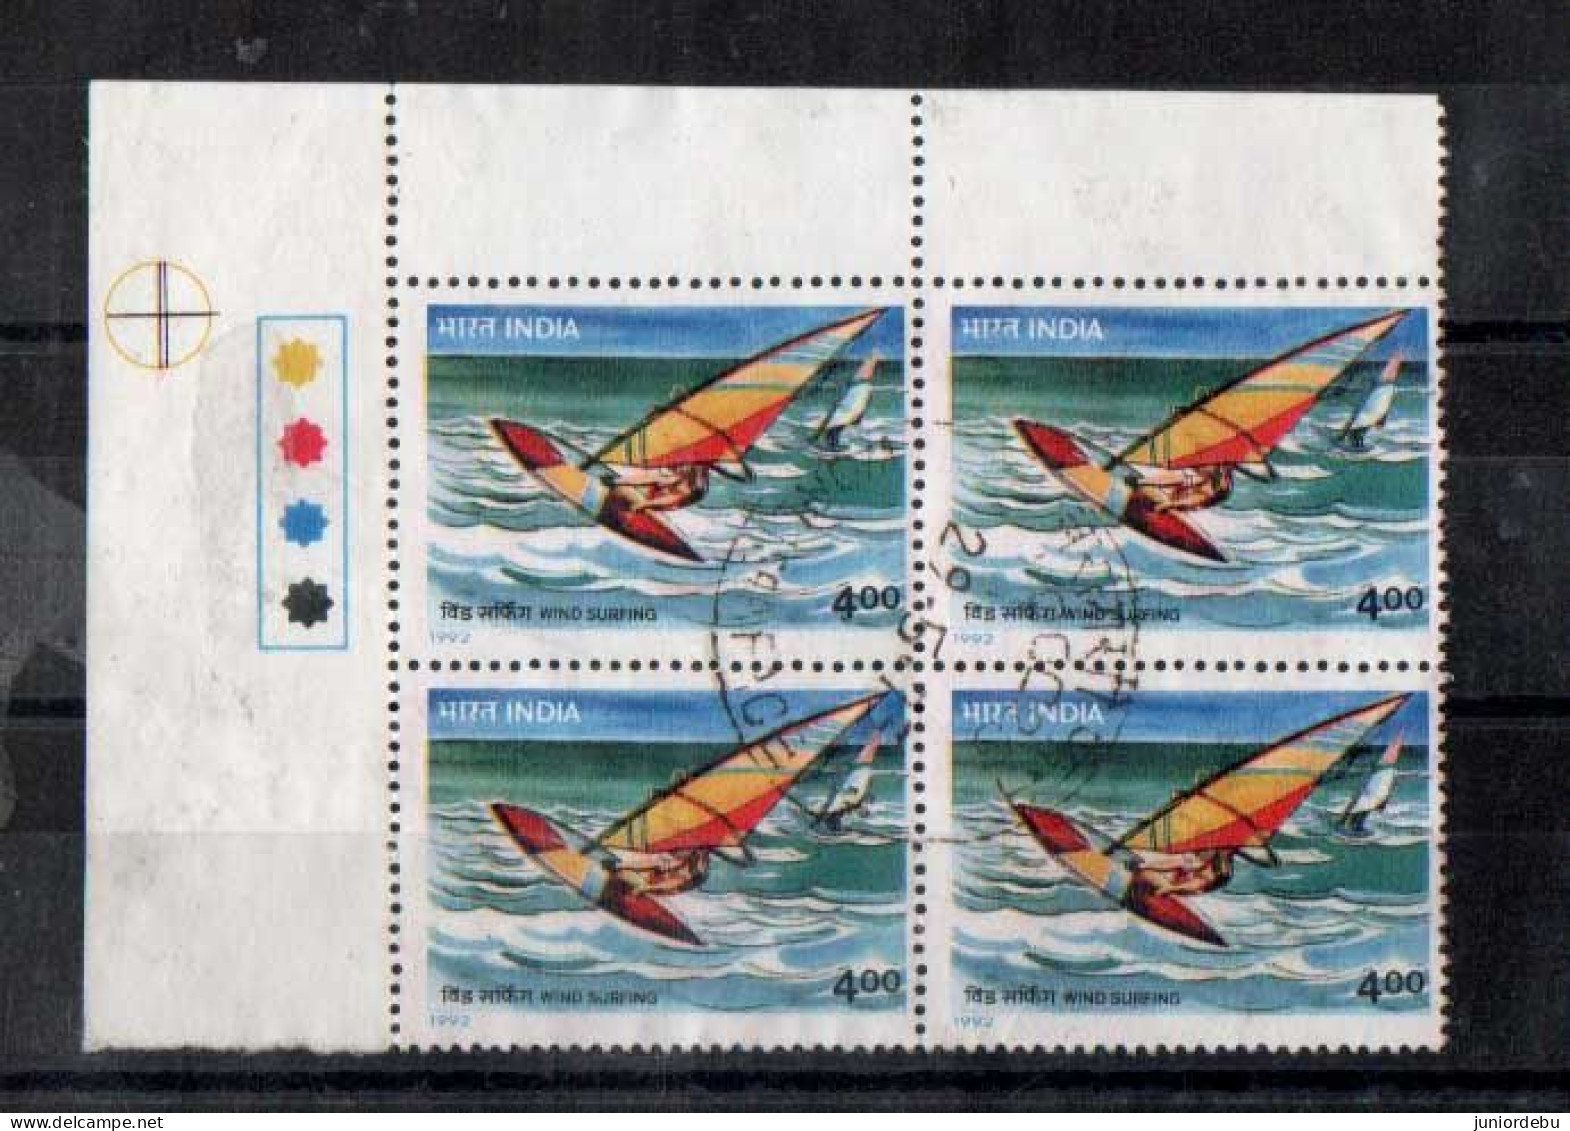 India - 1992 - Adventure Sport - Wind Surfing - Block Of 4 - Fine Used. - Usados